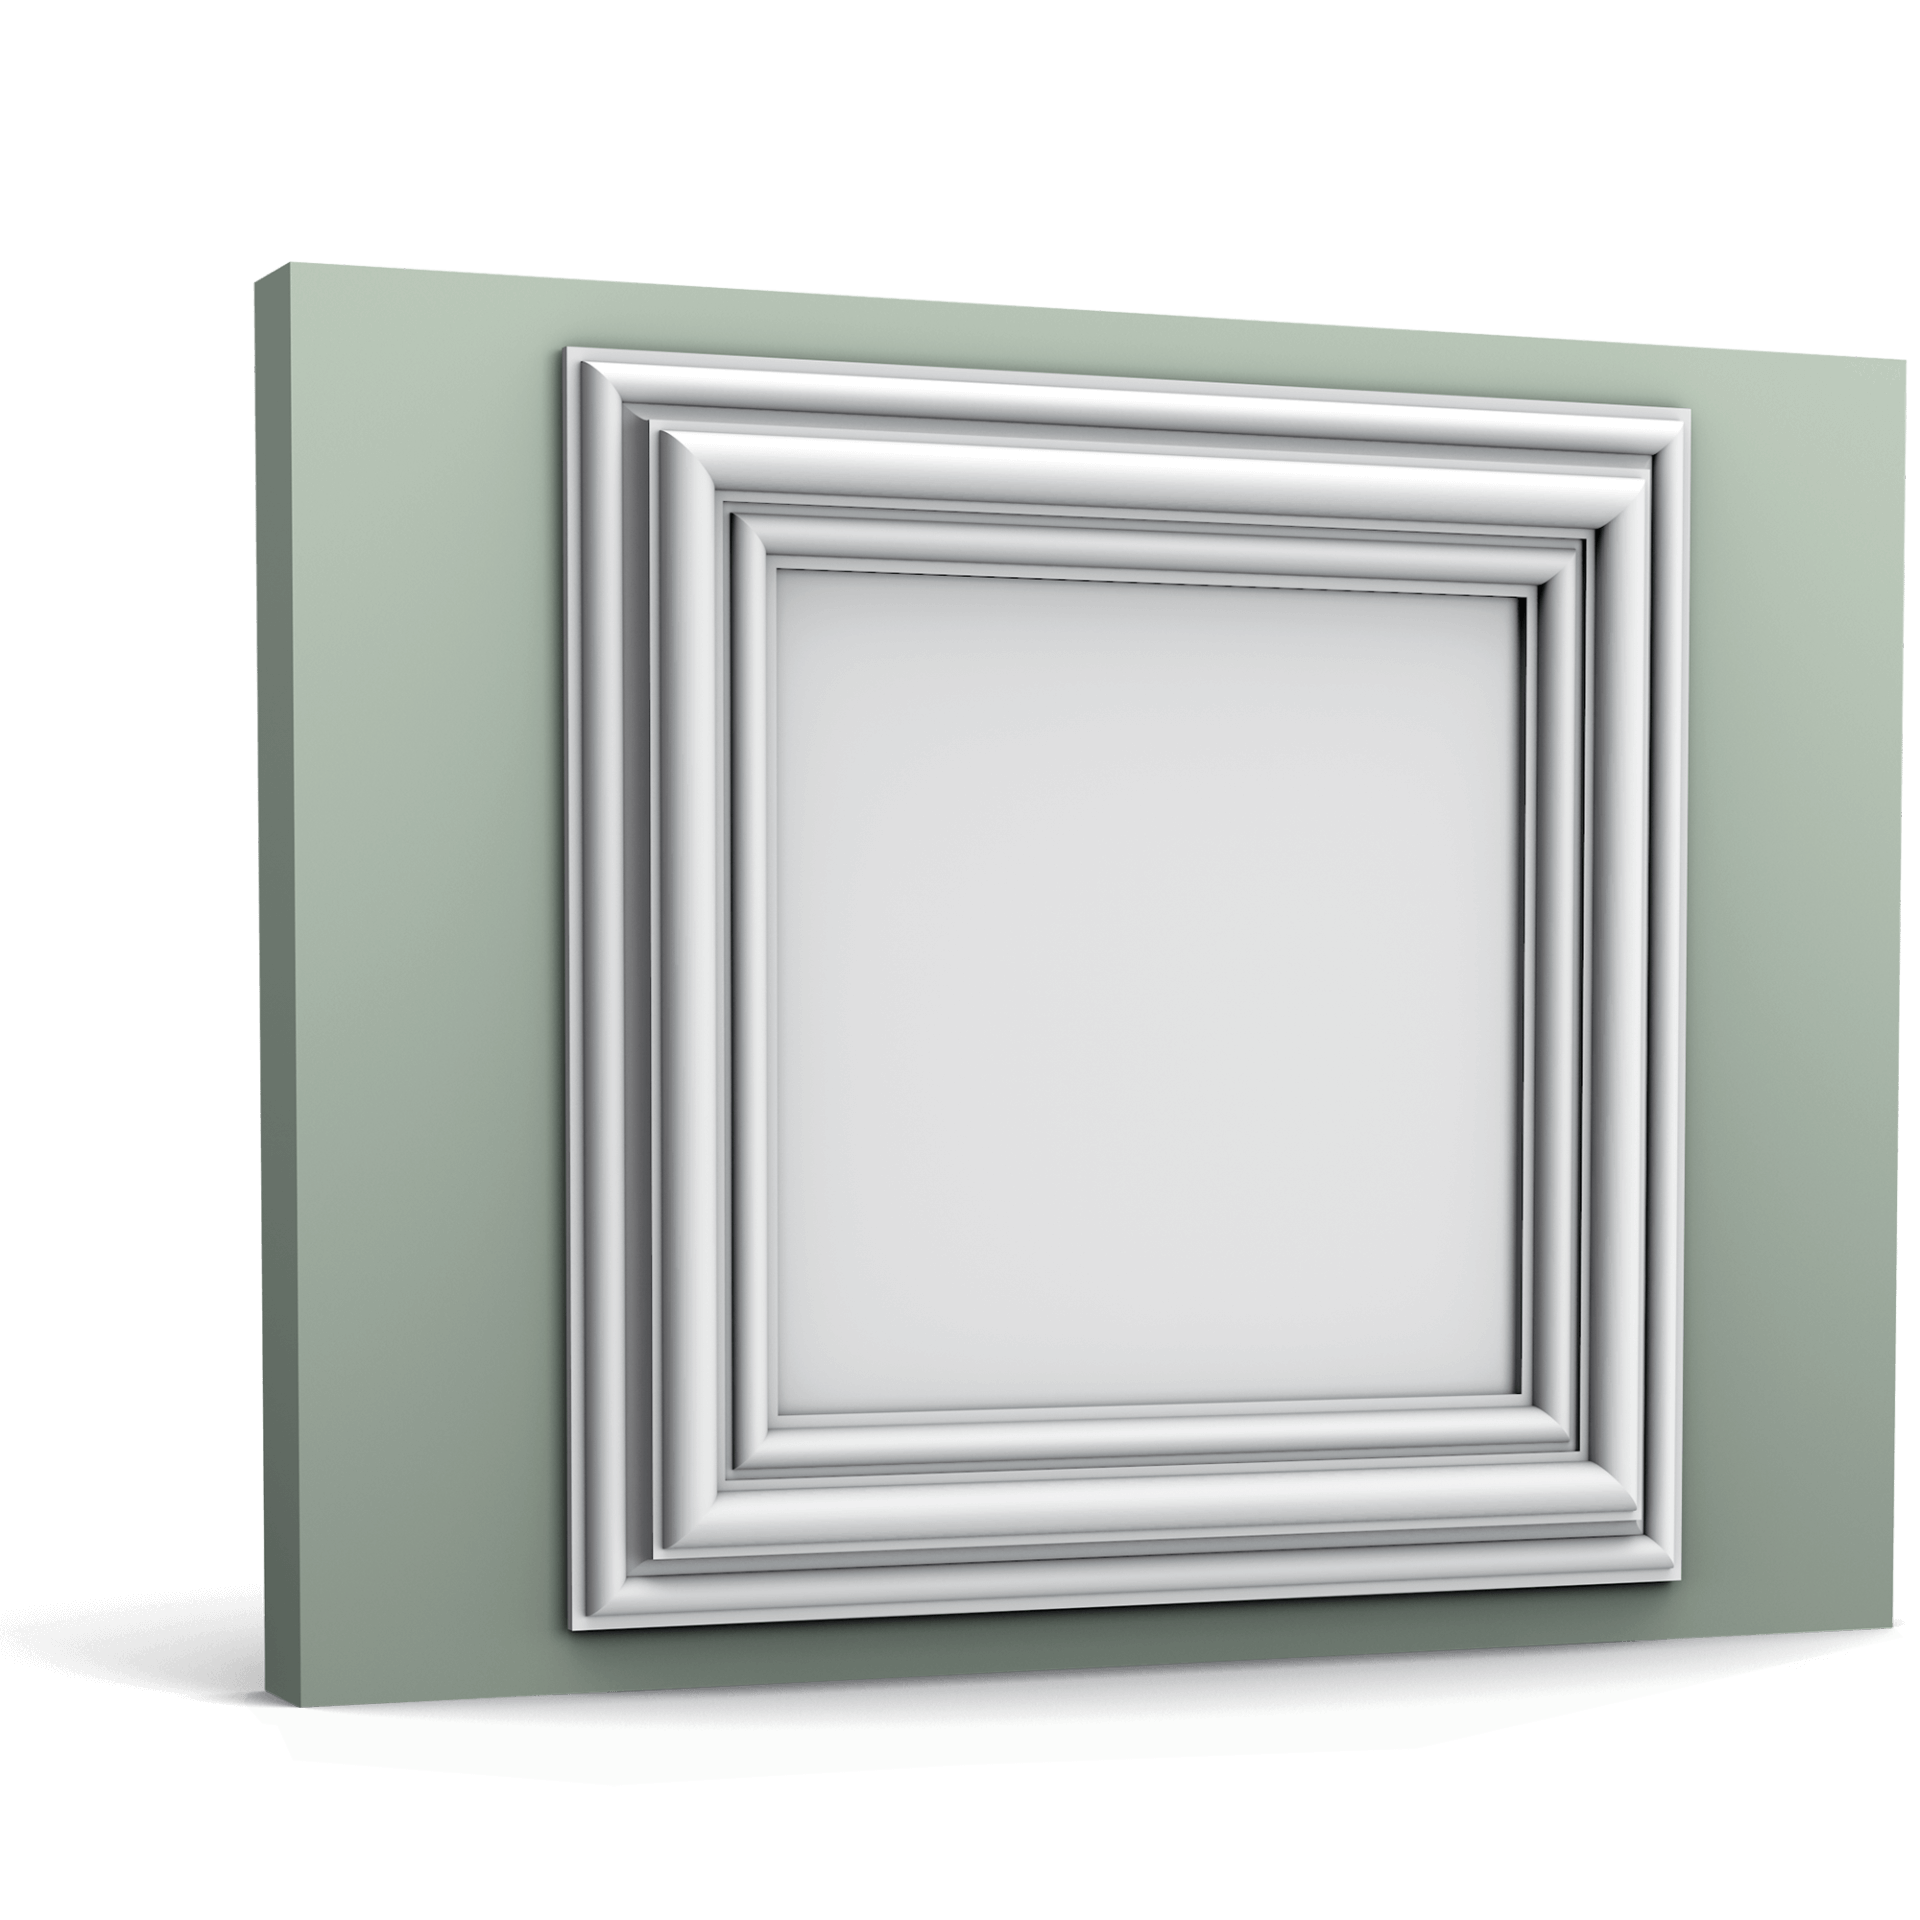 The W121 Wall Frame is unique: a ready-made wall panel with a lot of detail for easy, fast and beautifully finished installation. It is an economical solution for wall depth creation and can be made even more dynamic by filling it up with with our insert W122 or W123.